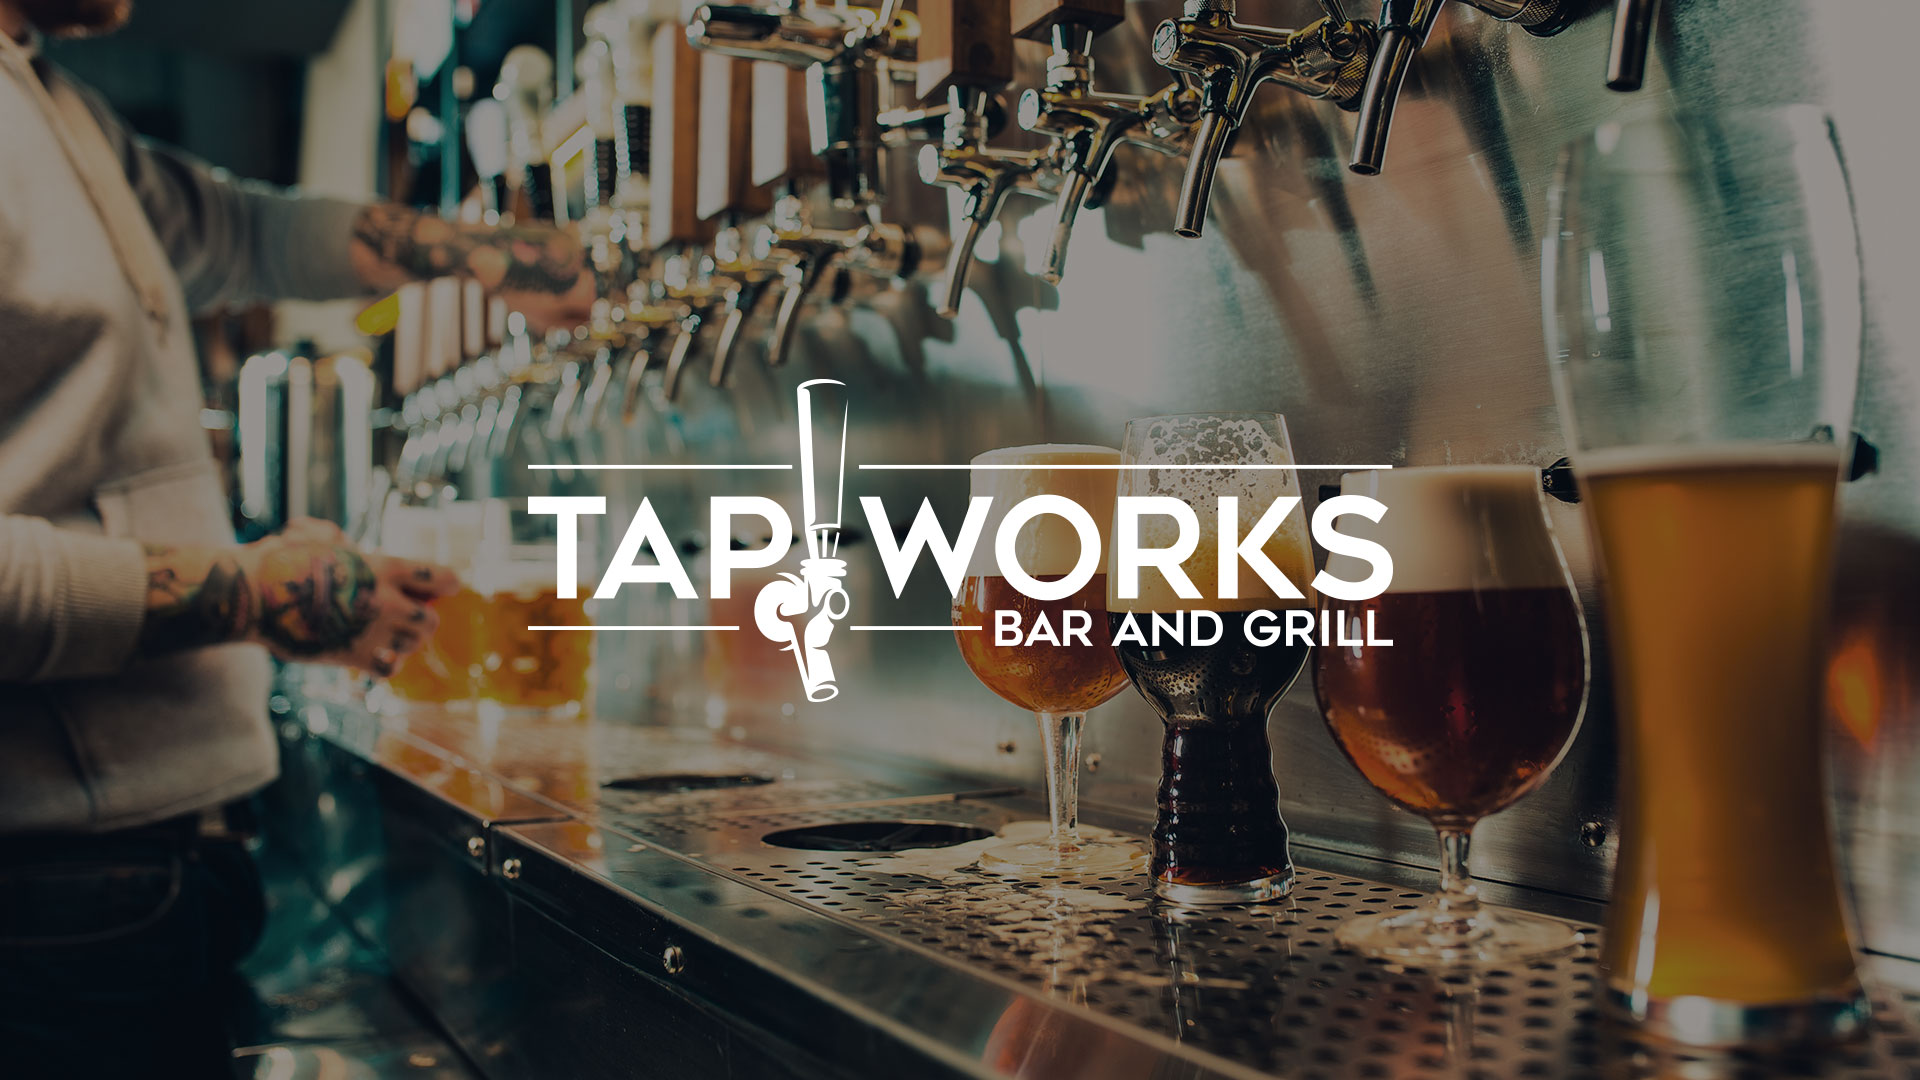 Tapworks feature